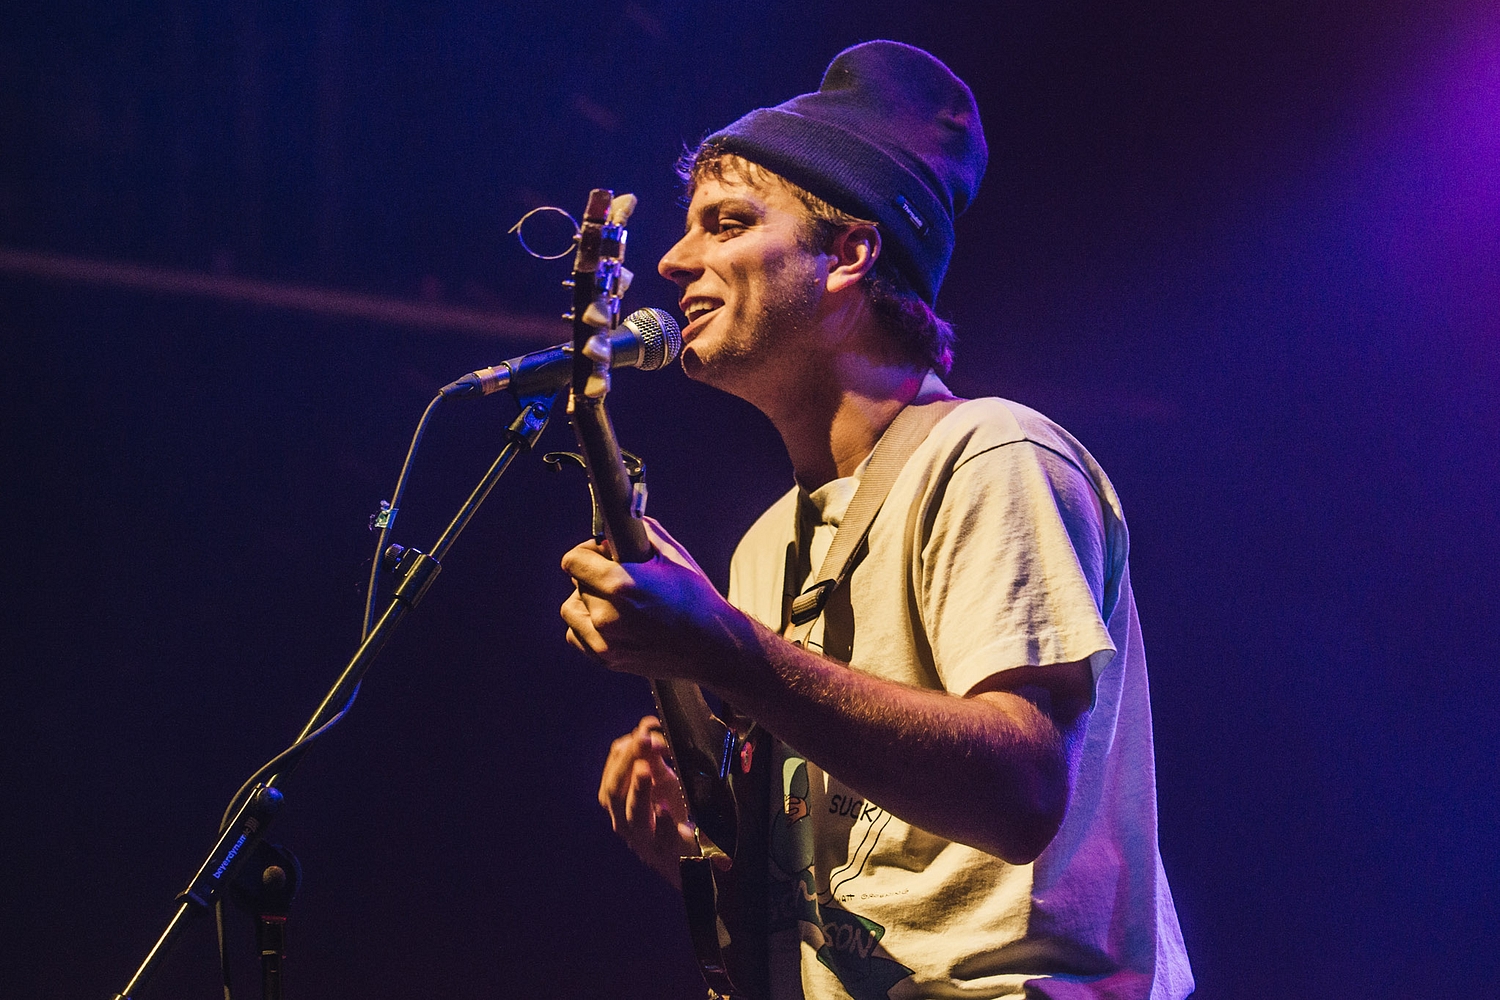 Mac DeMarco buys a rowboat, performs ‘No Other Heart’ in it